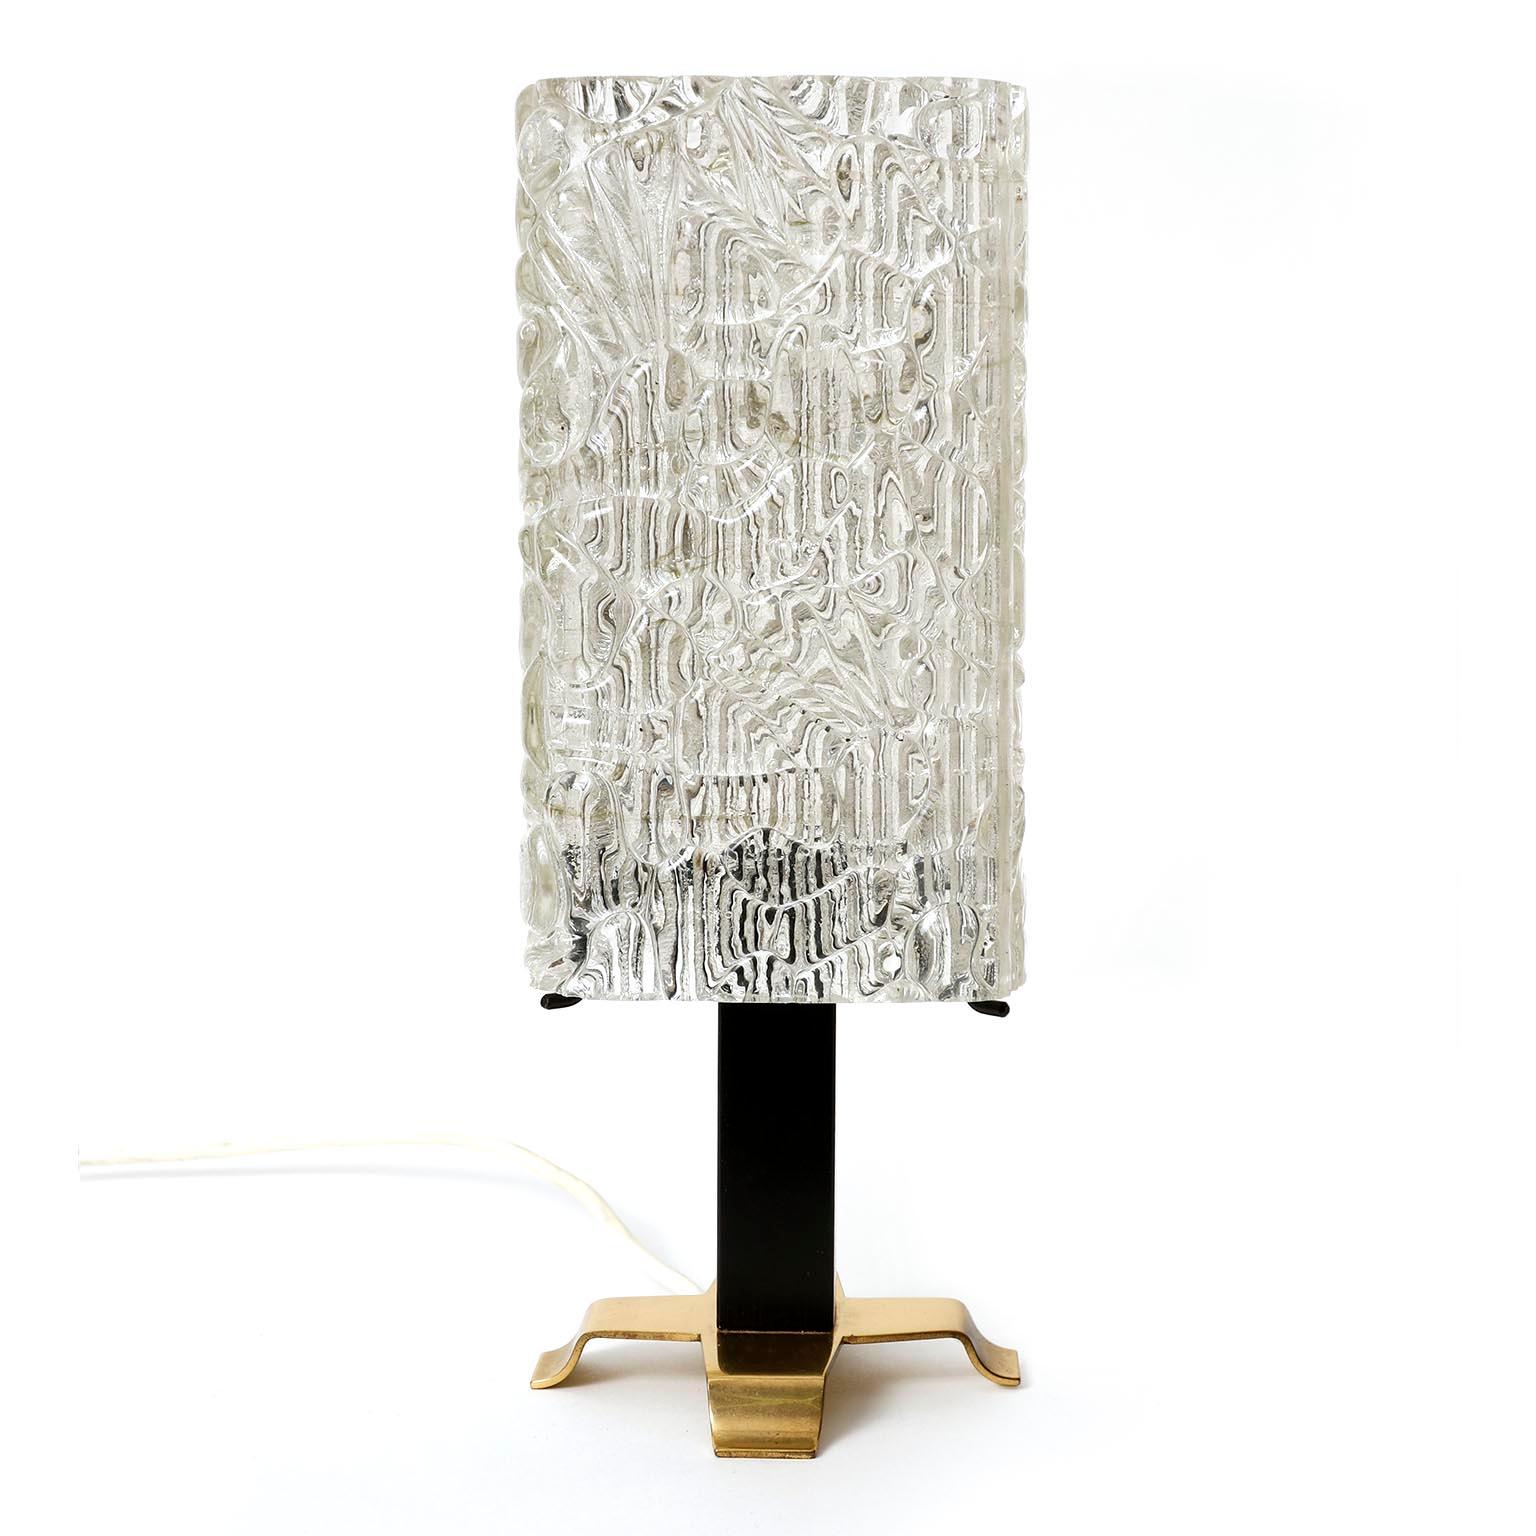 A lovely pair of table lamps by J. T. Kalmar, Austria, manufactured in midcentury, circa 1960 (late 1950s or early 1960s).
They are made of a polished brass base and a blackened metal stand which holds a square textured glass. A switch is on the